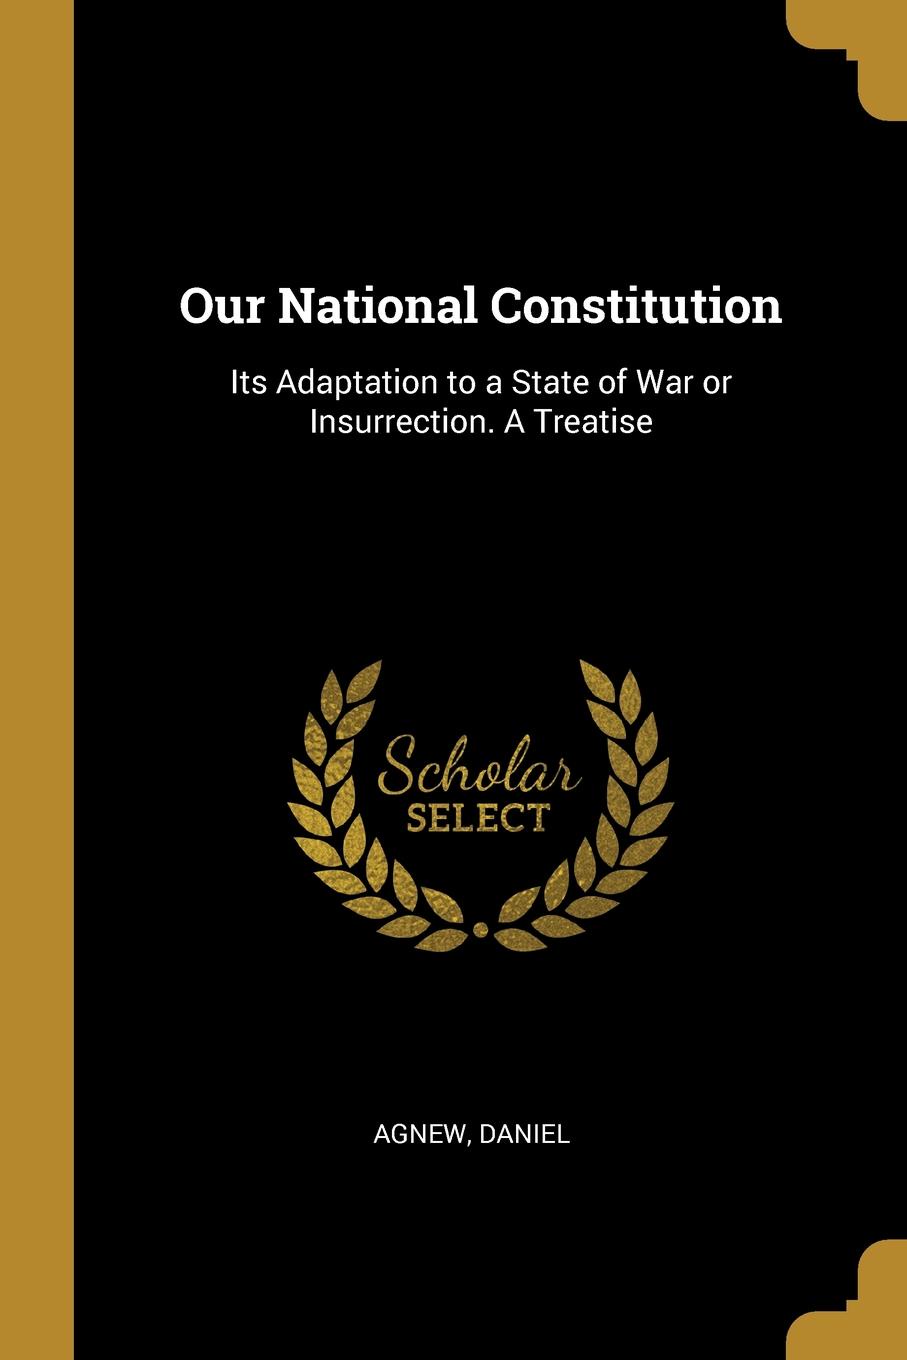 Our National Constitution. Its Adaptation to a State of War or Insurrection. A Treatise